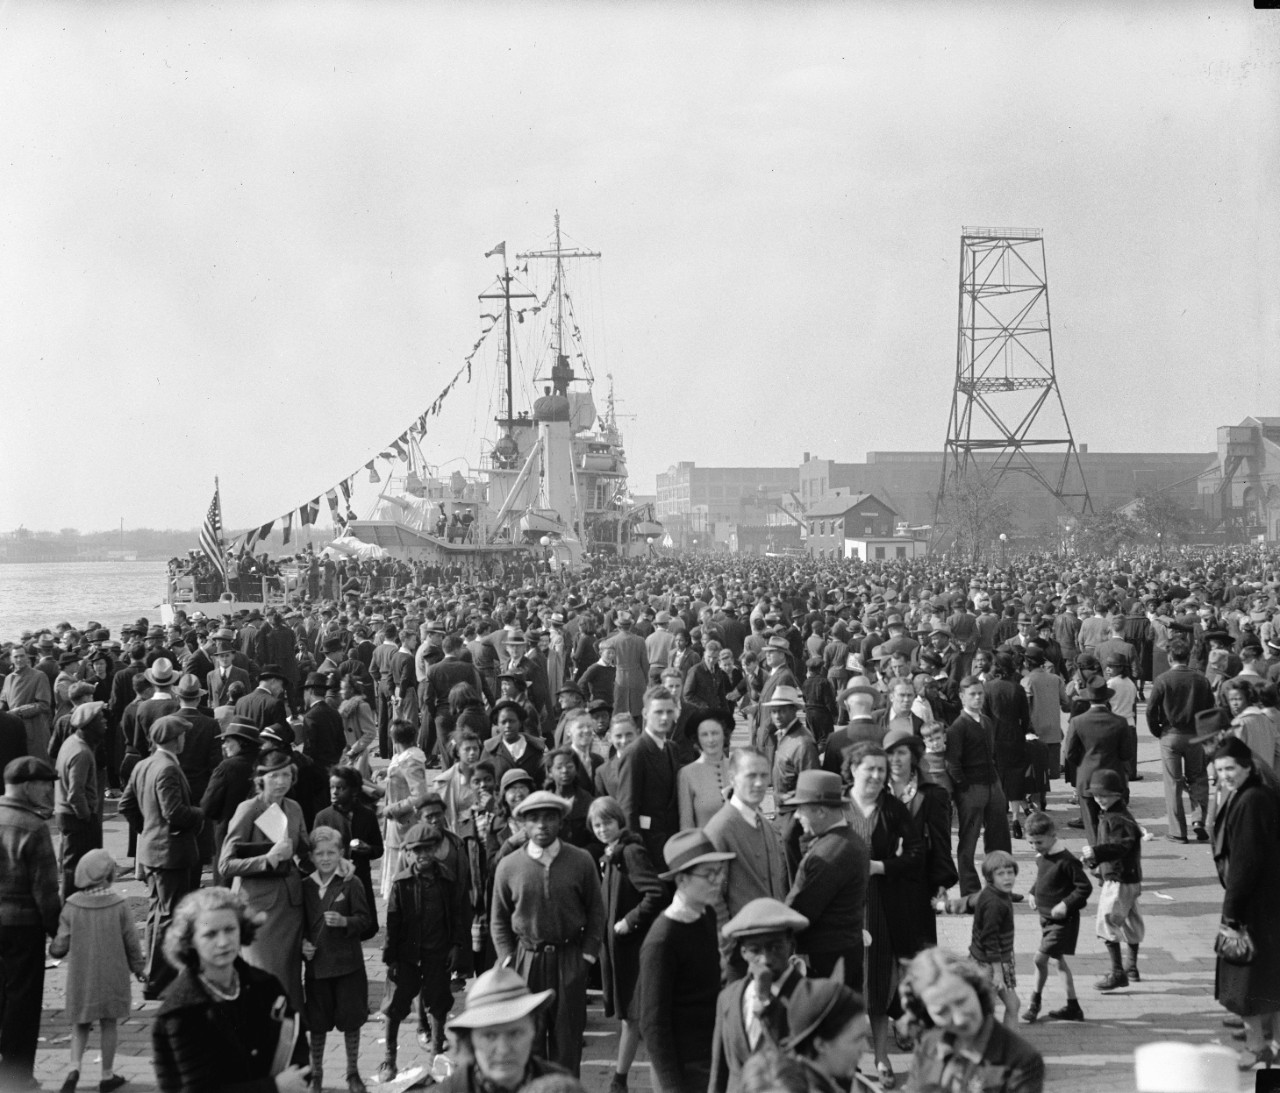 LC-DIG-HEC-25263:   Washington Navy Yard waterfront, 1938.    Navy Day Celebrations, with a view of some of the thousands that visited the Yard and looked the workings of the Navy over.  Photographed by Harris & Ewing, October 27, 1938.   Courtesy of the Library of Congress.  